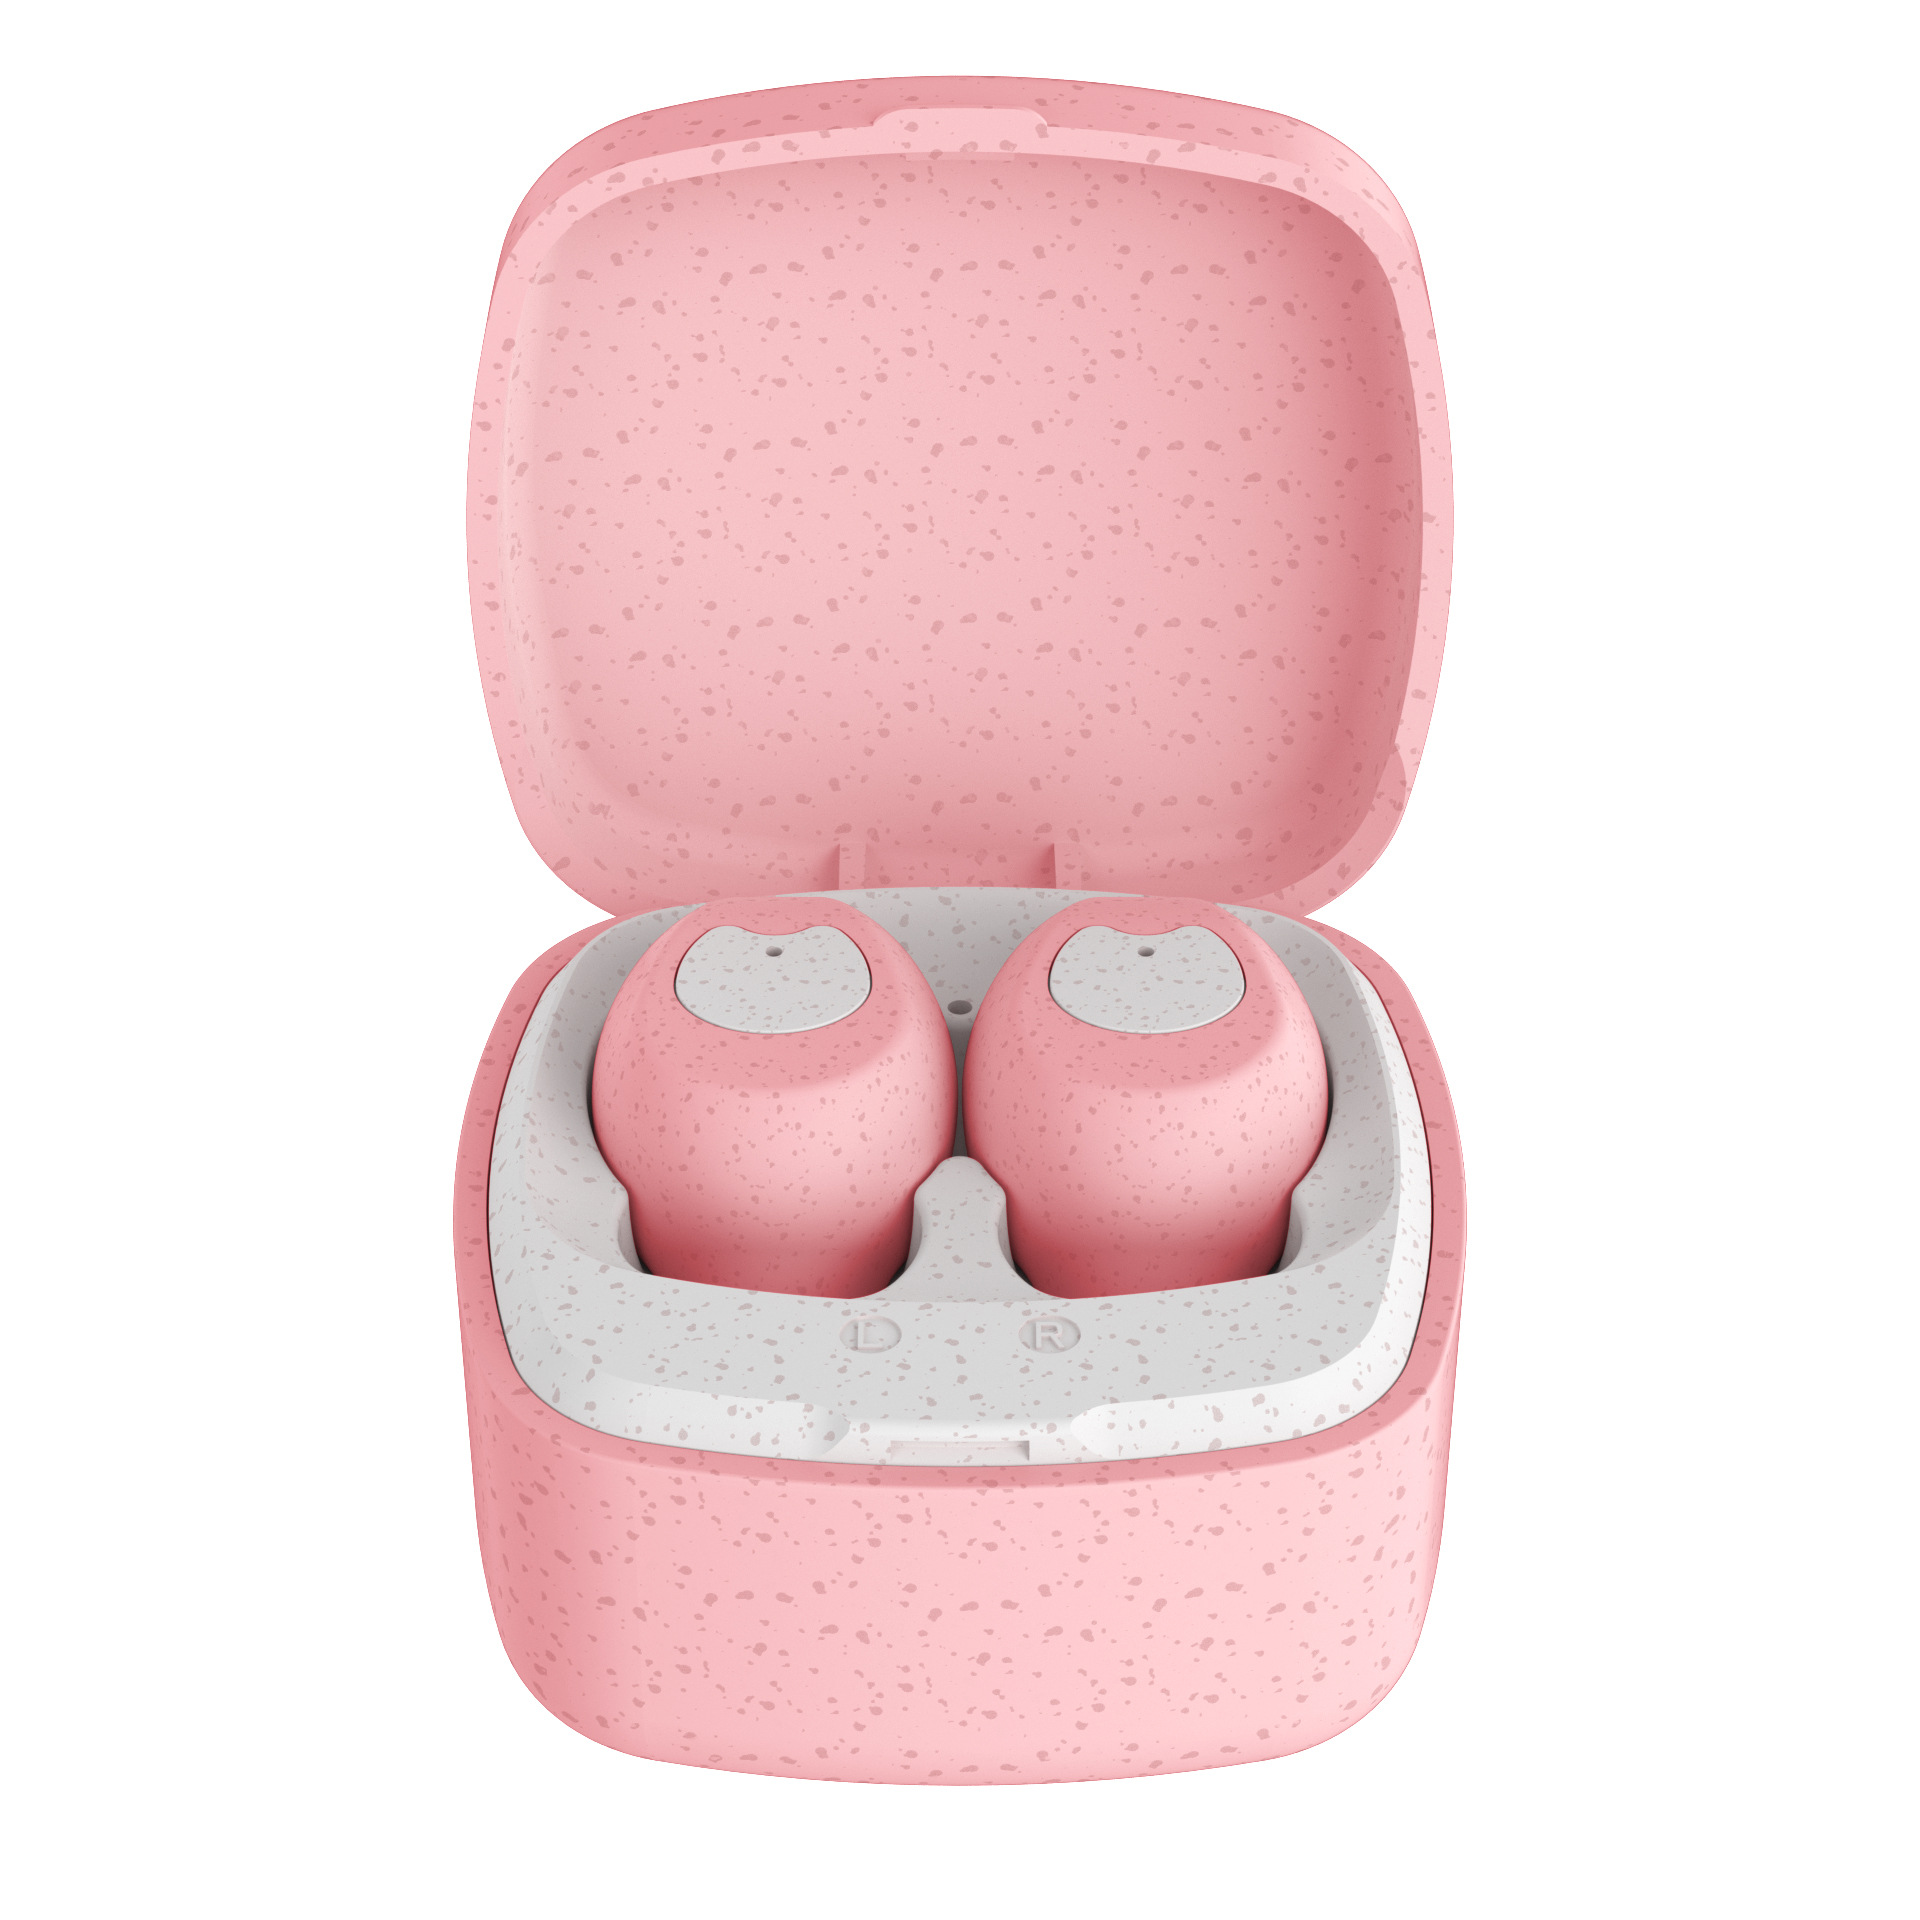 Private Model TWS Macaron Cheap Bluetooth Headset New Wireless Bilateral in-Ear Music Gaming Headset